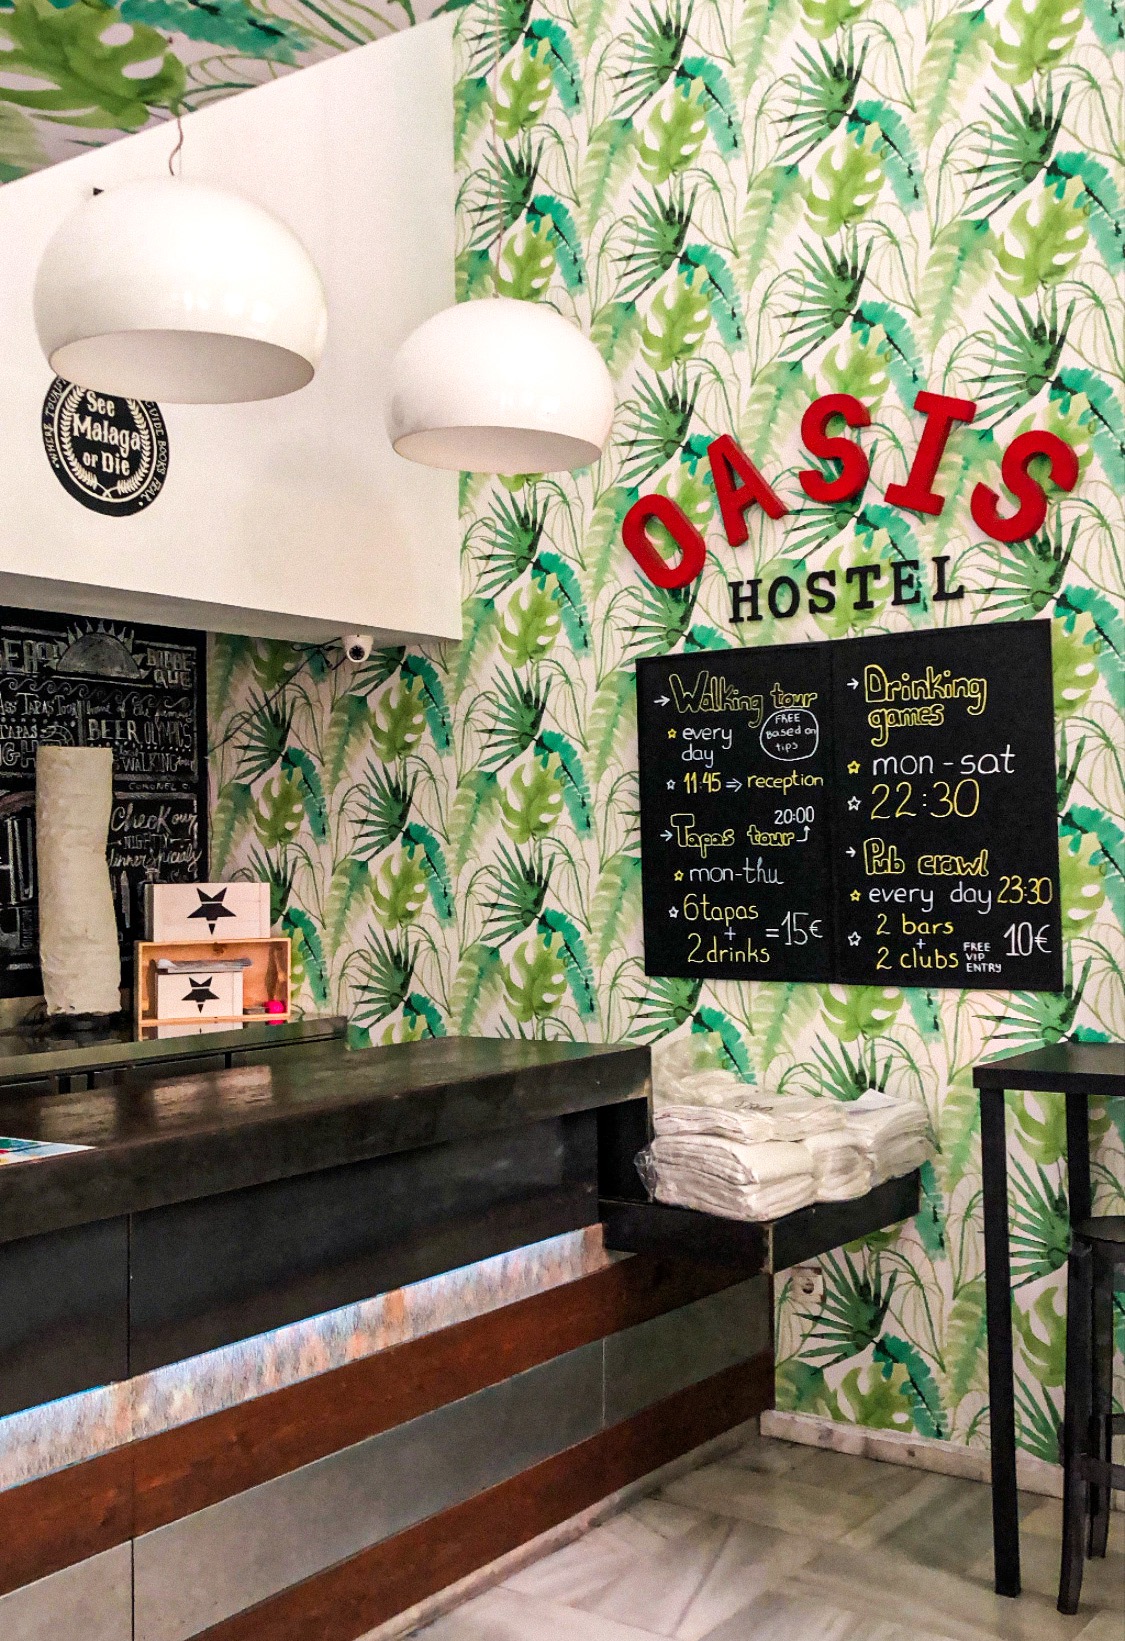 Where to stay in Málaga? Oasis Backpackers Hostel.